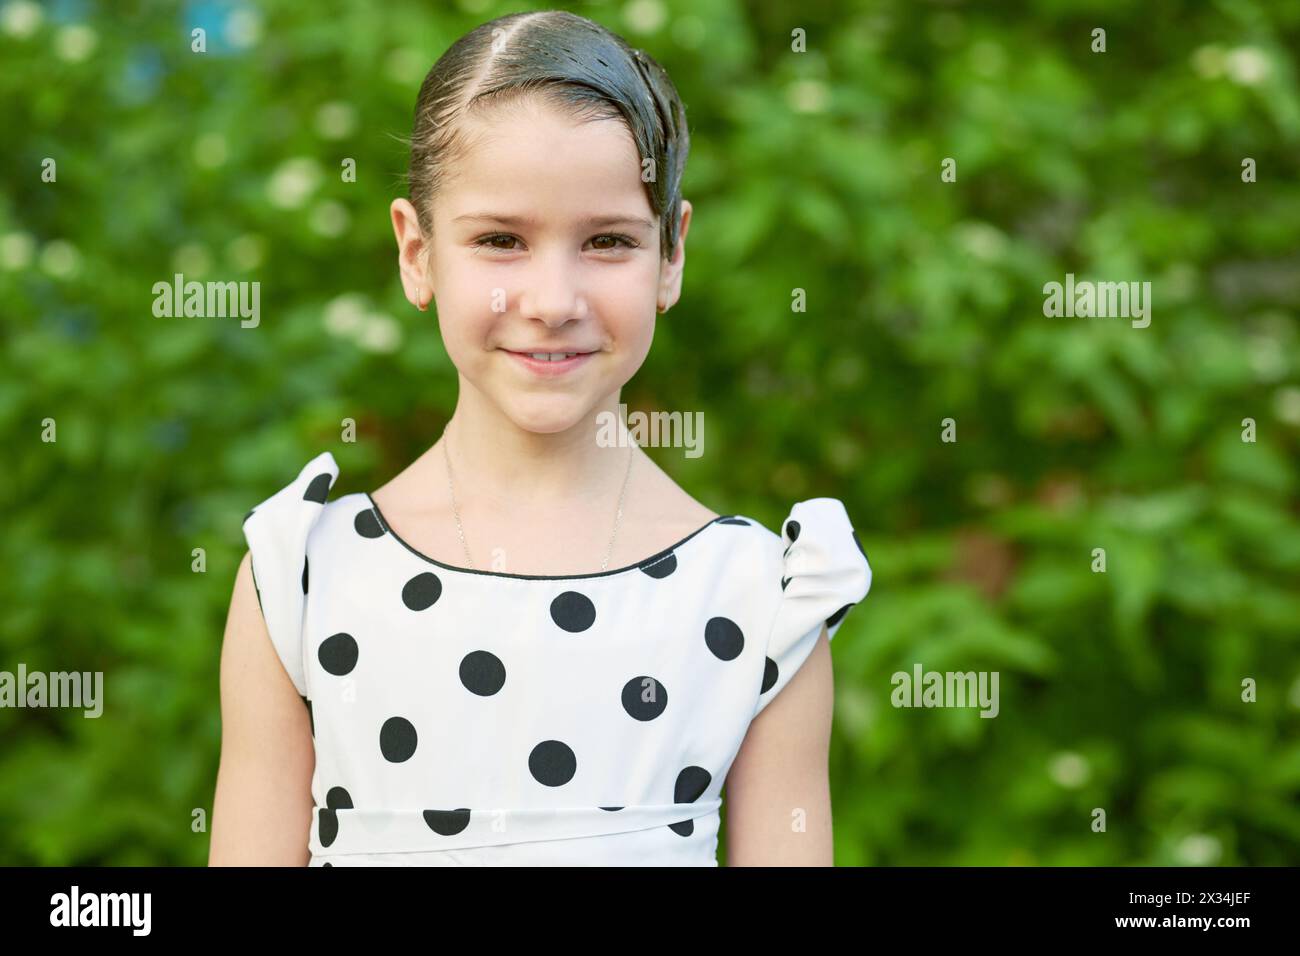 Half-length portrait of smiling little girl dressed in polka-dotted gown. Stock Photo